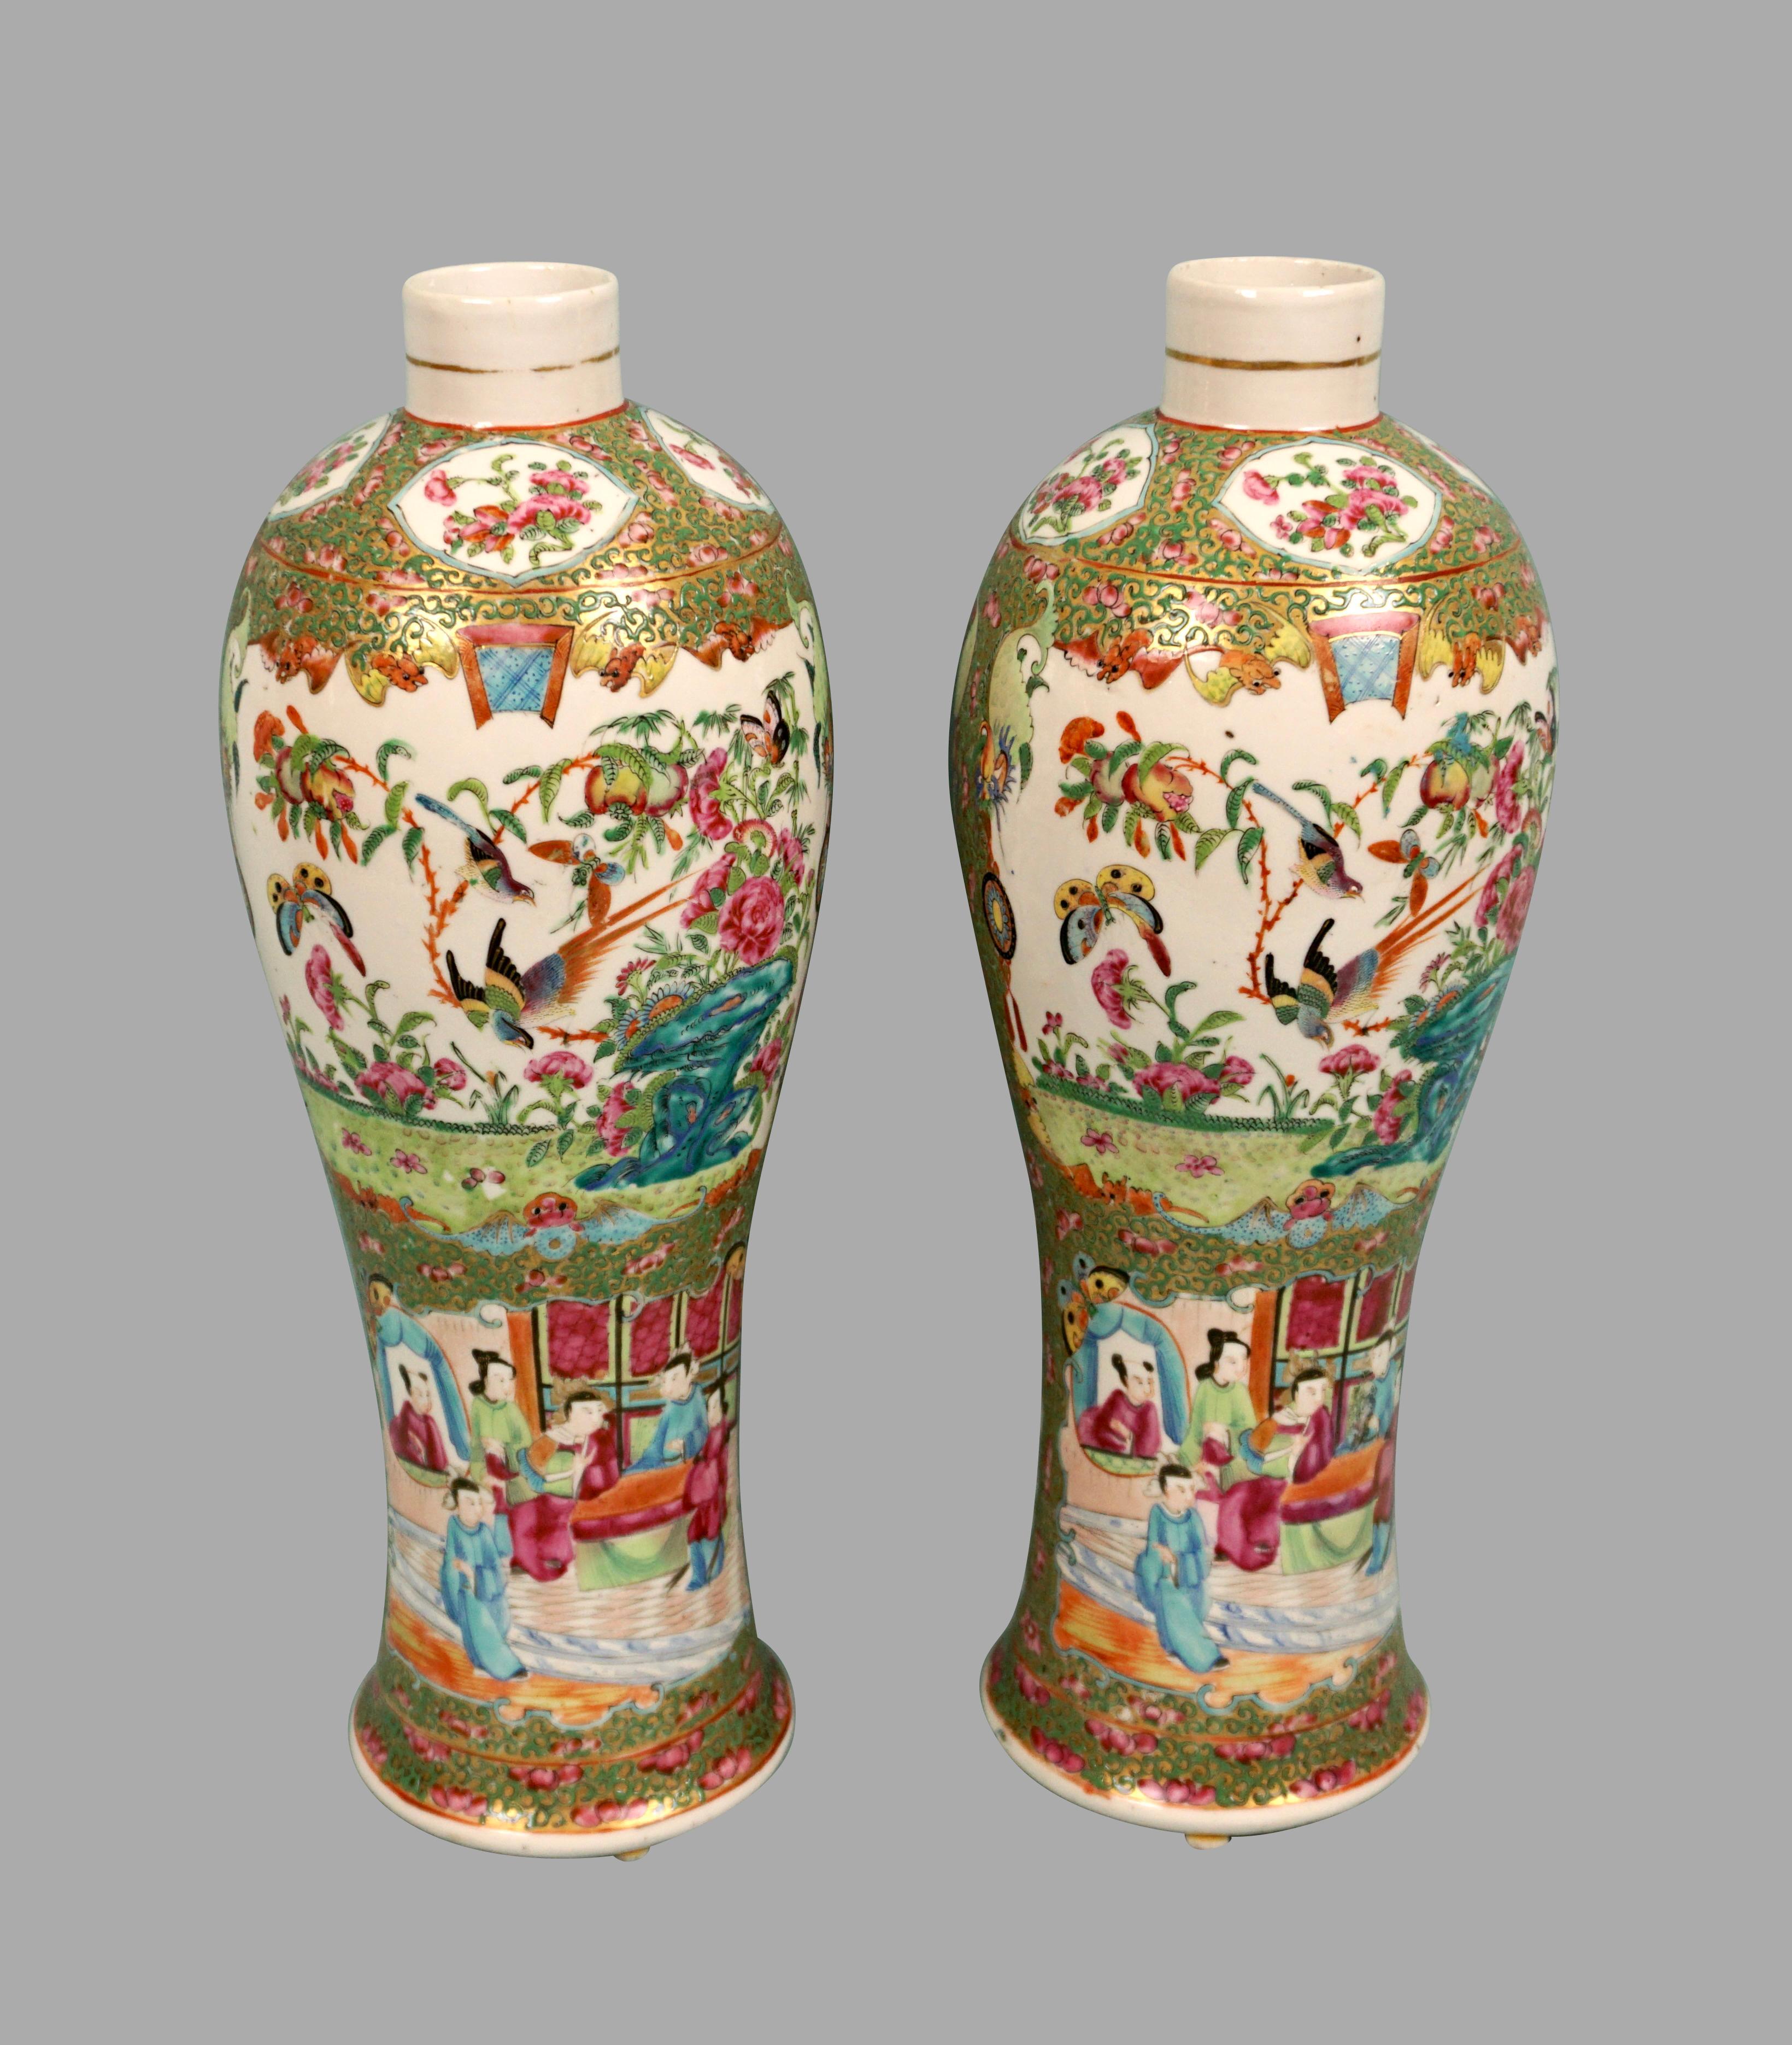 A pair of Chinese export baluster form vases decorated overall with elaborately dressed female figures, flowers and butterflies in the famille verte palette with additional colors of rose, blue, orange and gold all in a garden setting. Circa